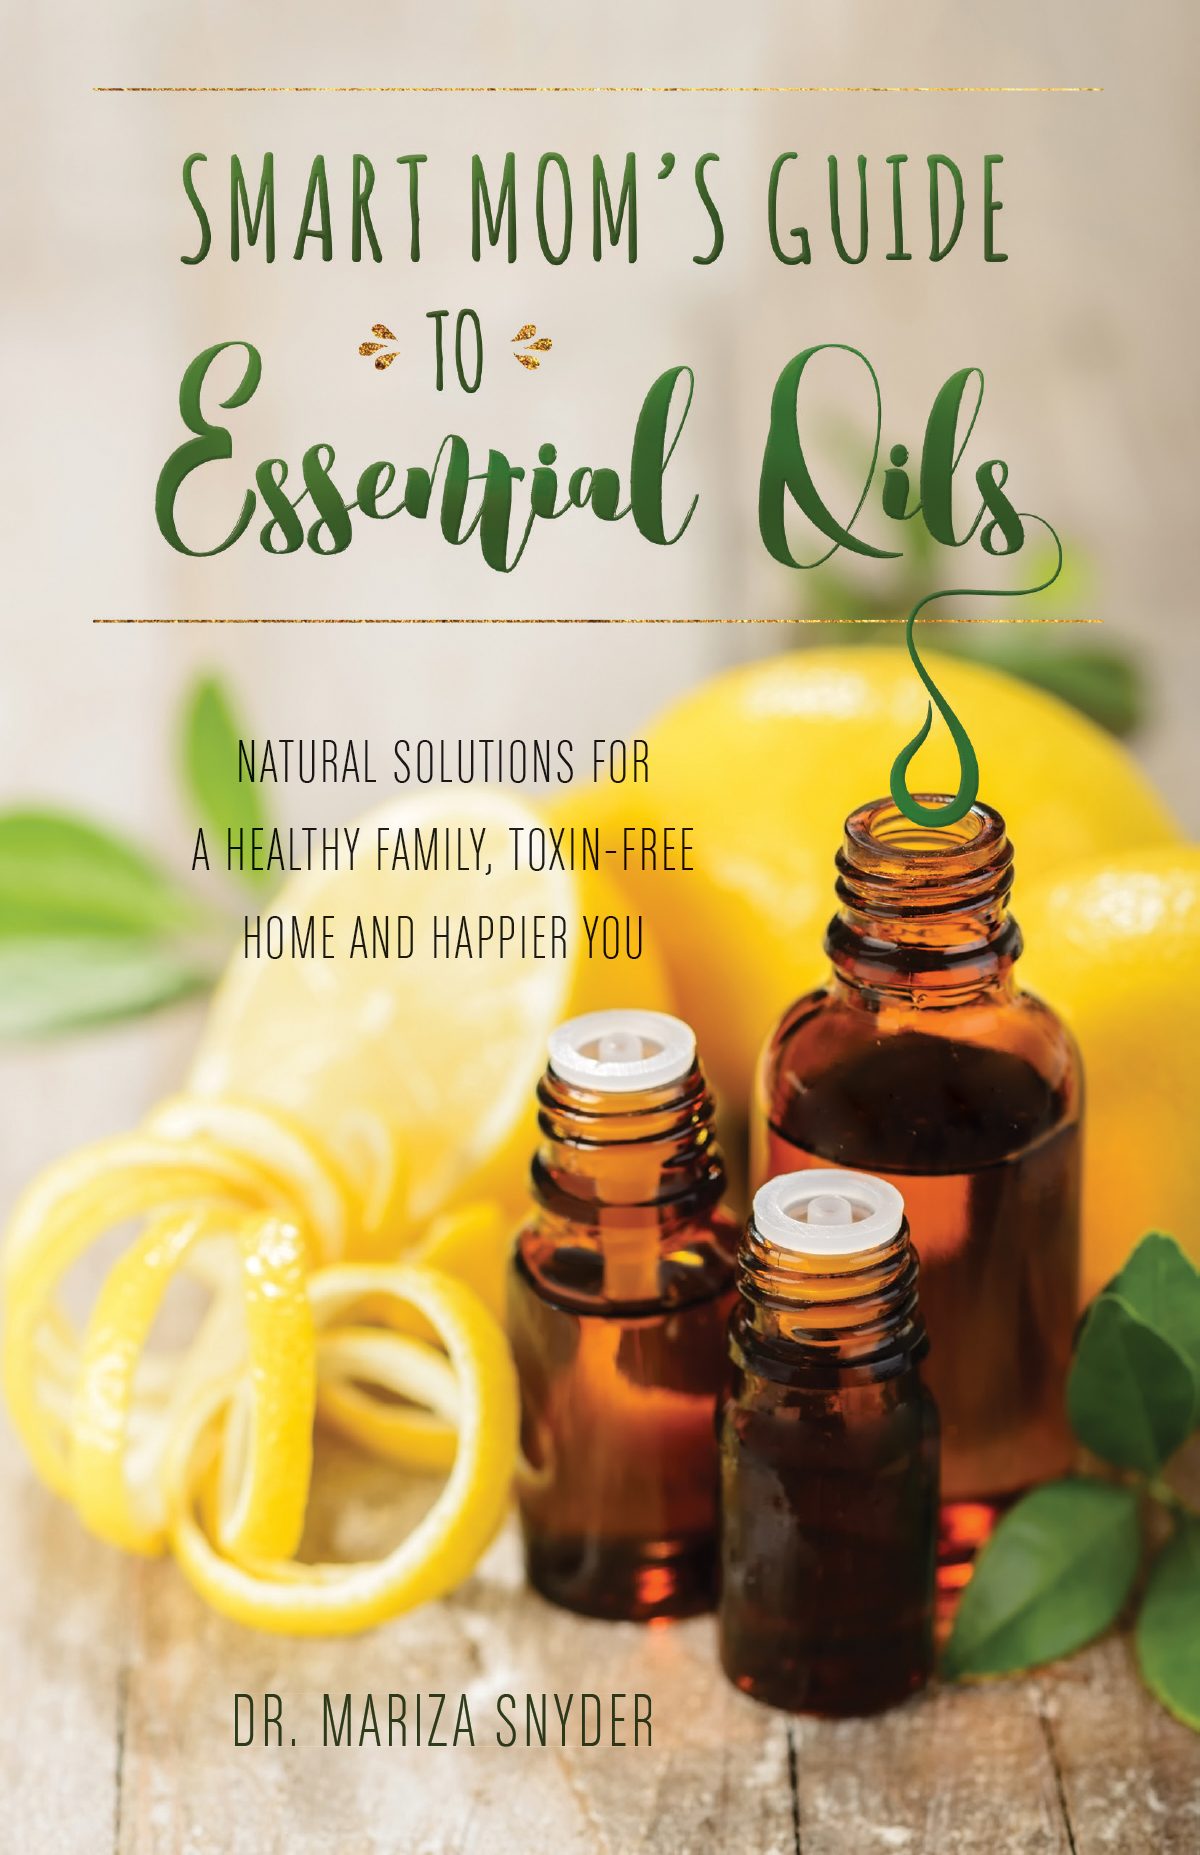 Smart Mom's Guide to Essential Oils by Mariza Snyder